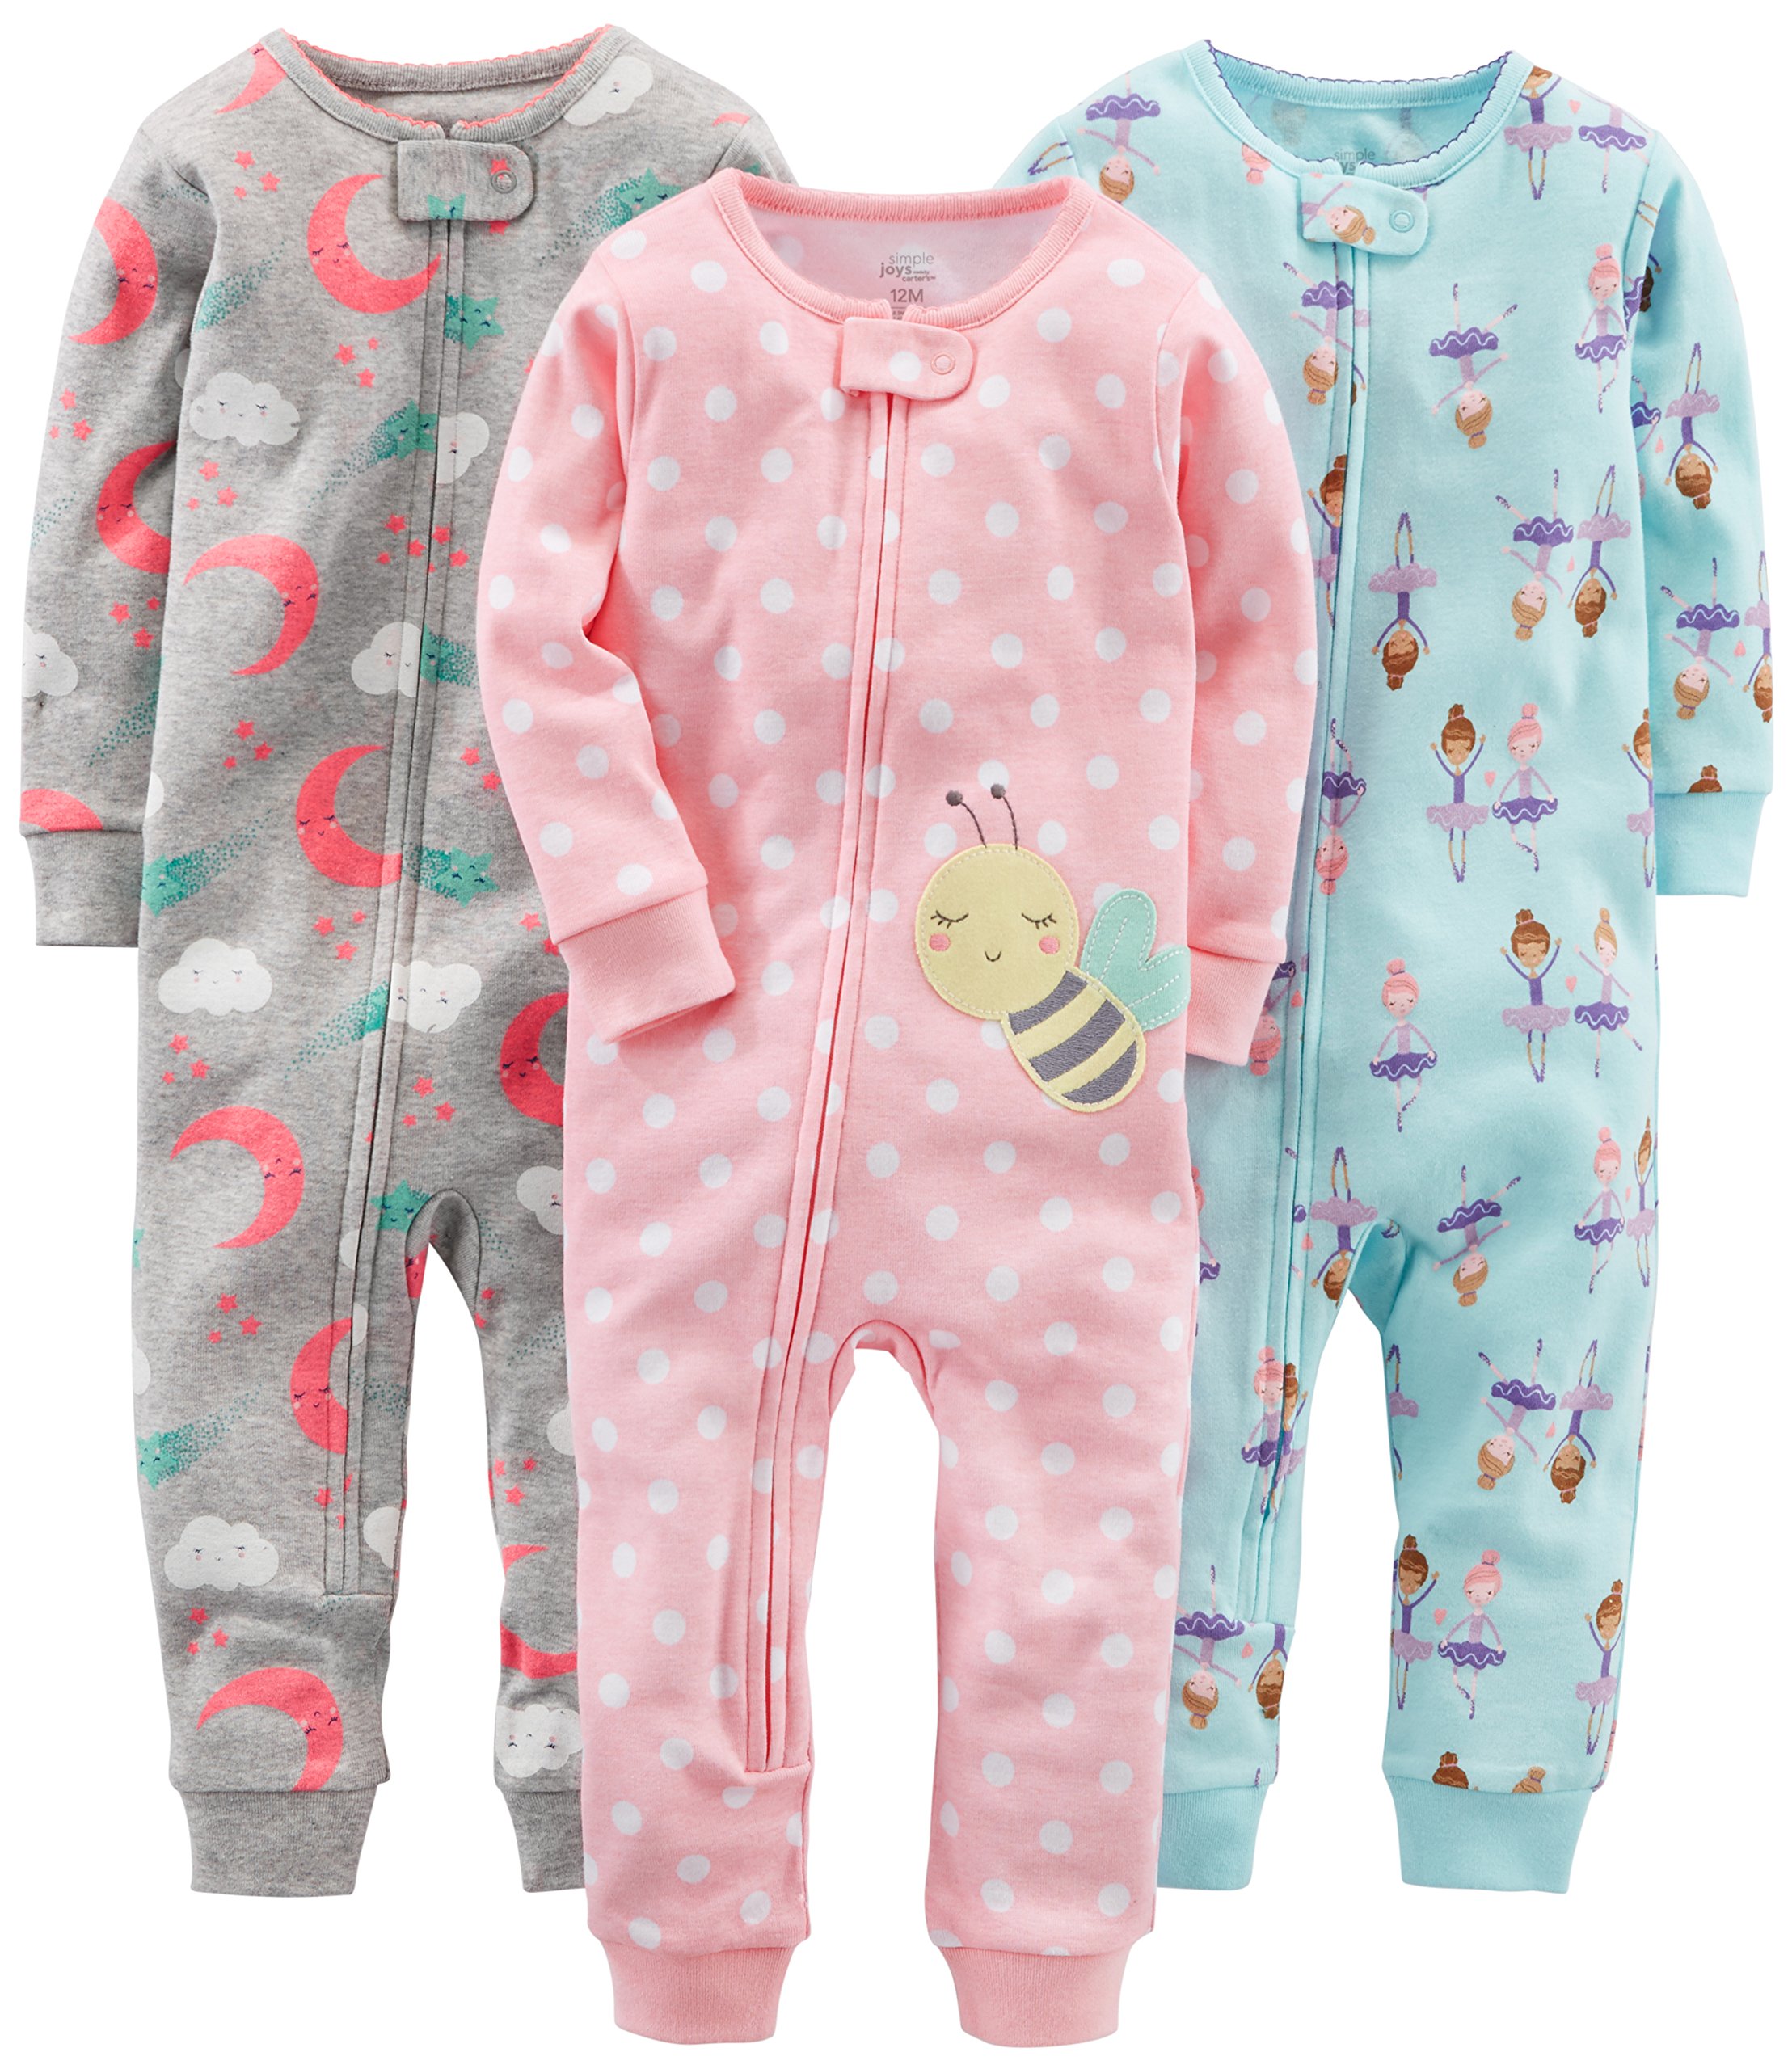 Simple Joys by Carter's Toddlers and Baby Girls' Snug-Fit Footless Cotton Pajamas, Pack of 3